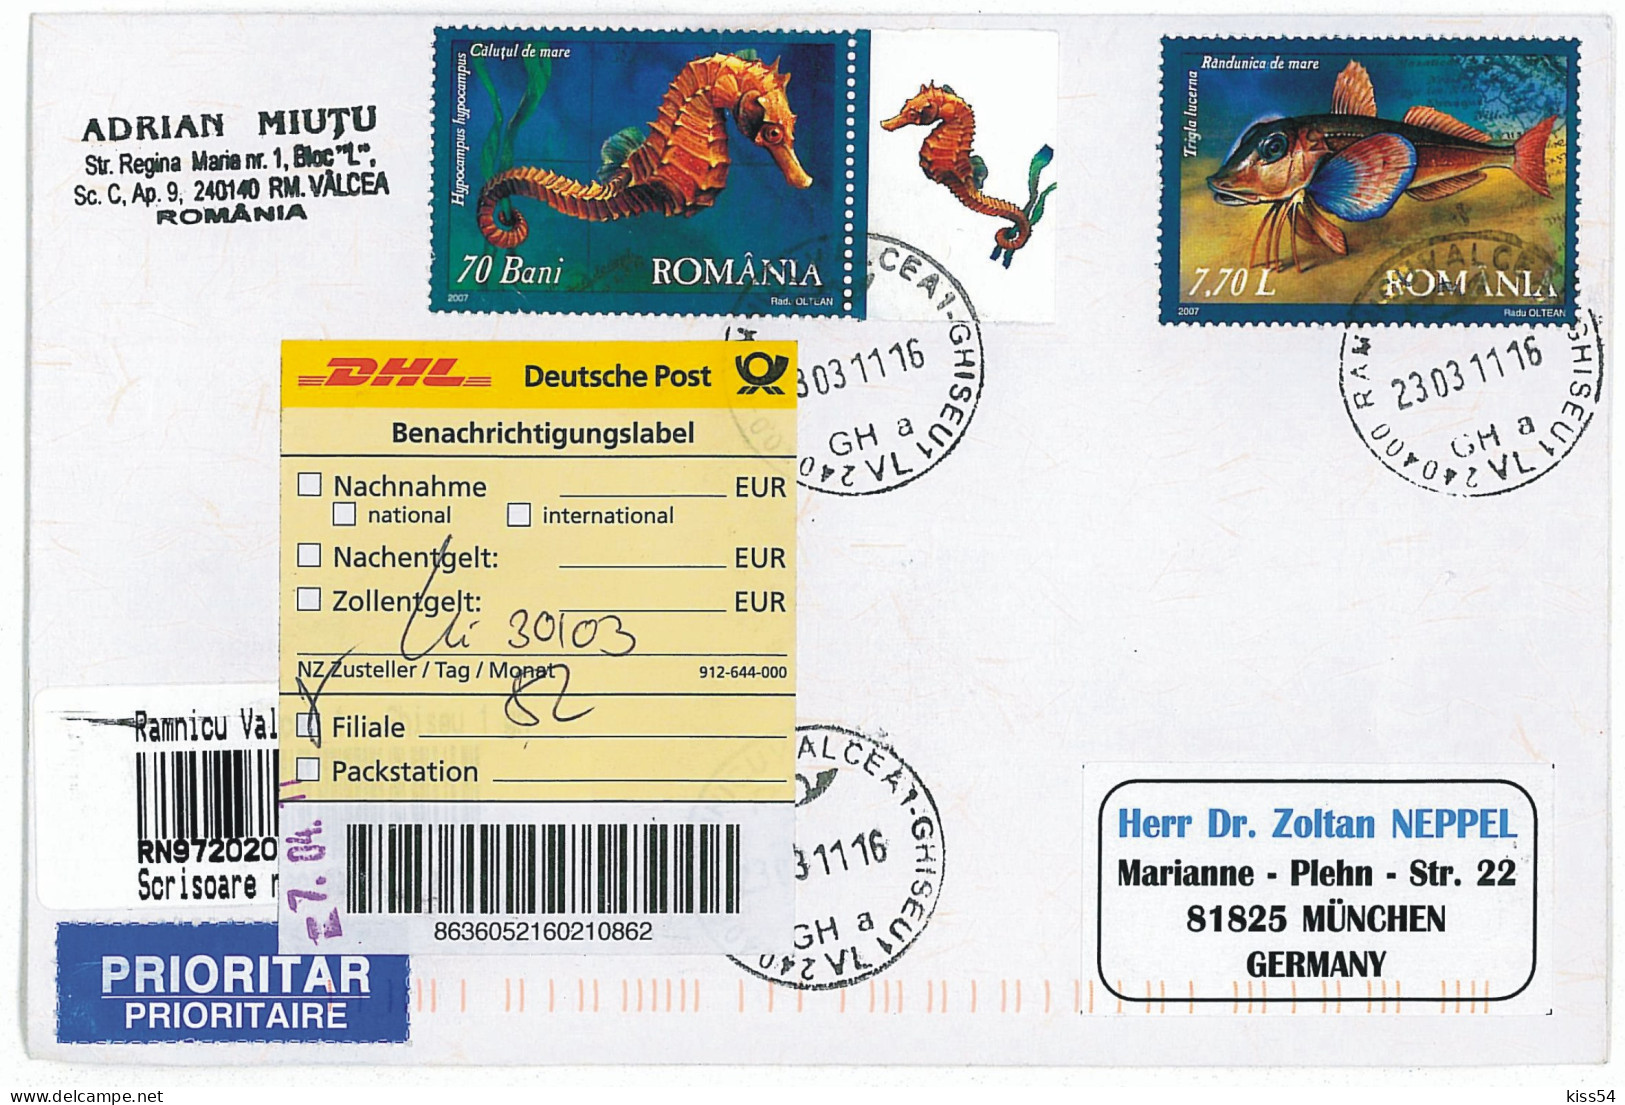 NCP 13 - 72020-a FISHES, Romania - INTERNATIONAL Registered, Stamp With TABS - 2011 - Briefe U. Dokumente